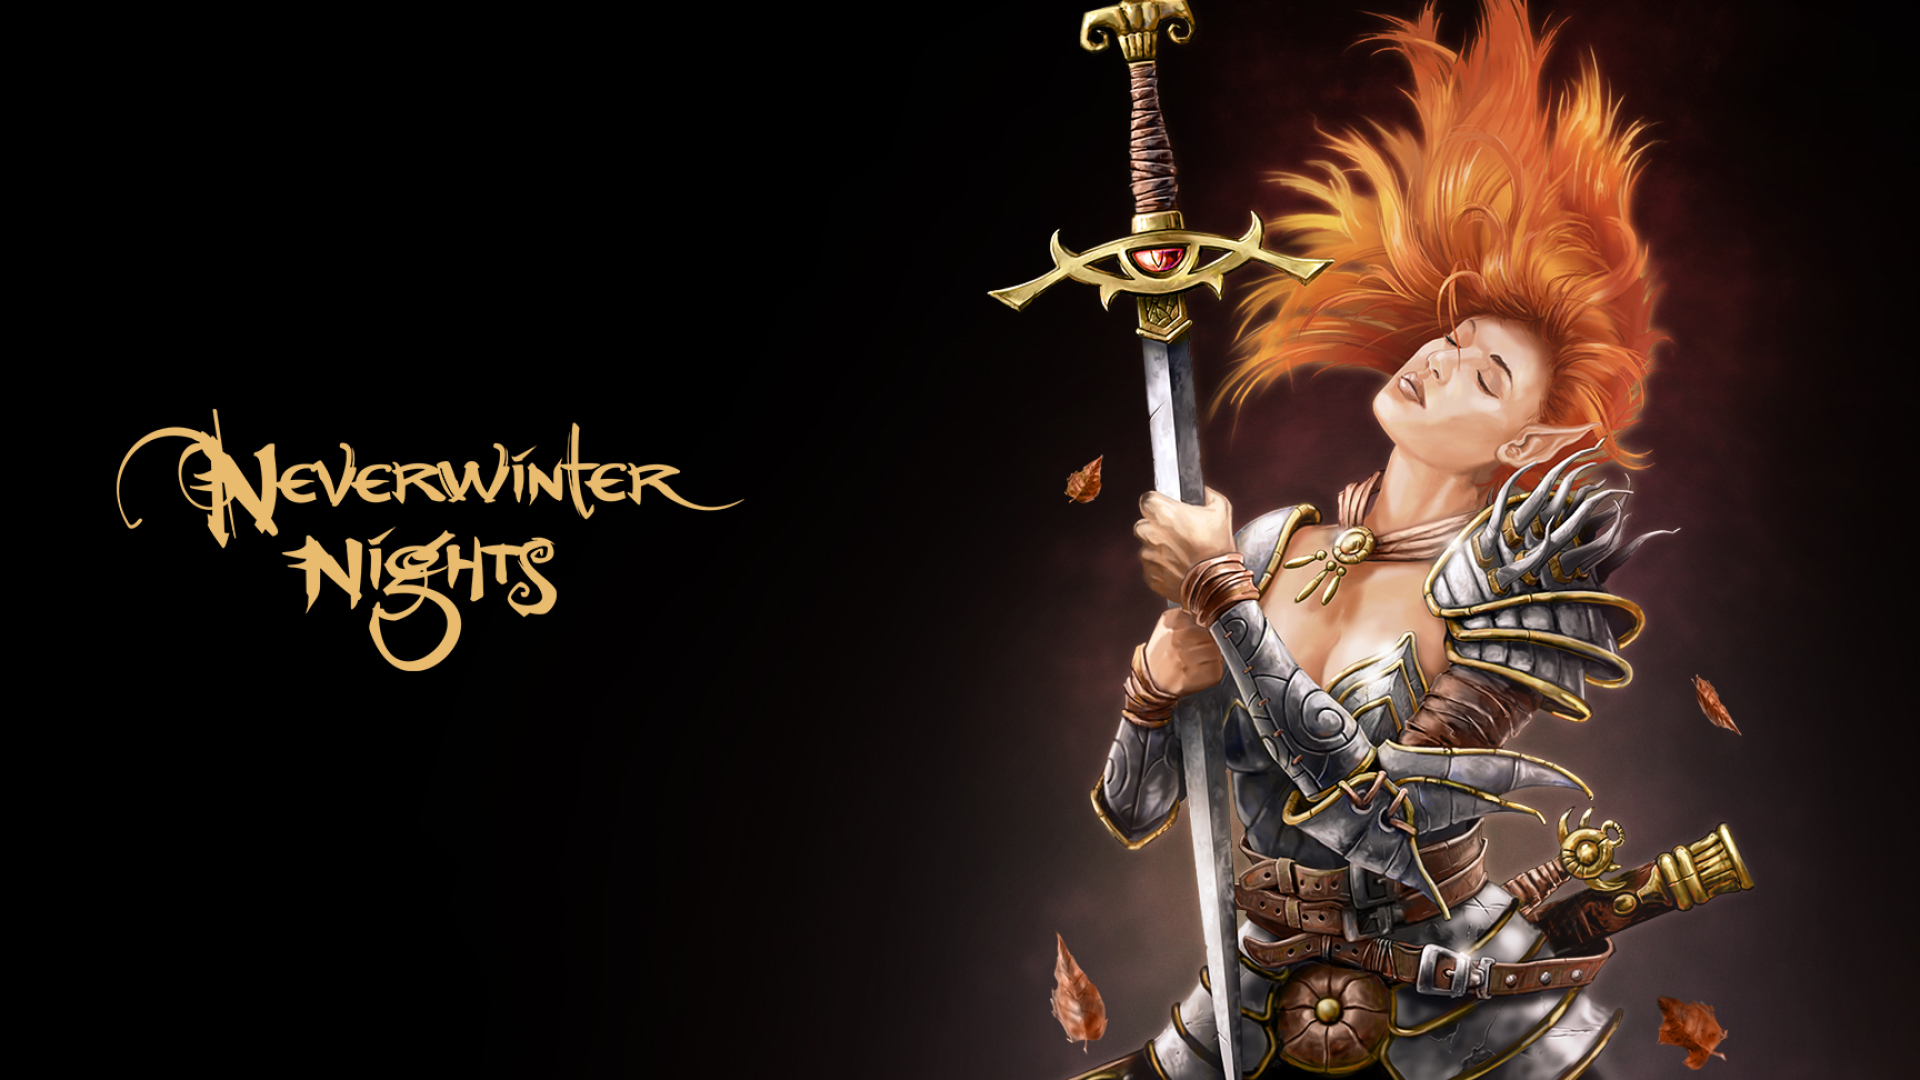 1920x1080 30+ Neverwinter Nights HD Wallpapers and Backgrounds